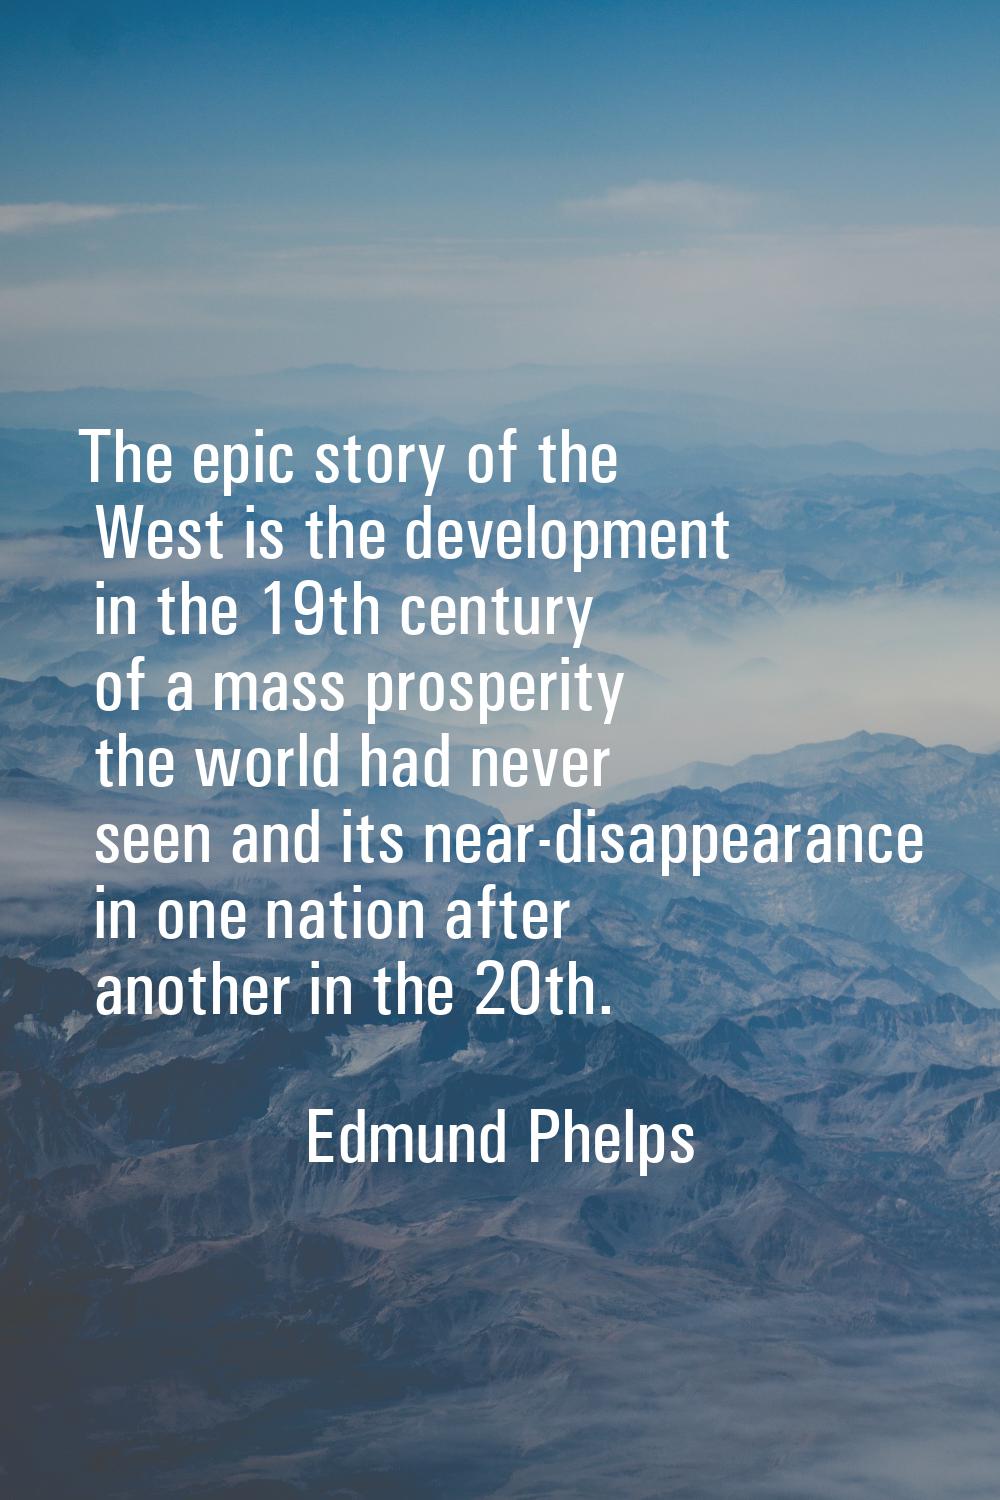 The epic story of the West is the development in the 19th century of a mass prosperity the world ha